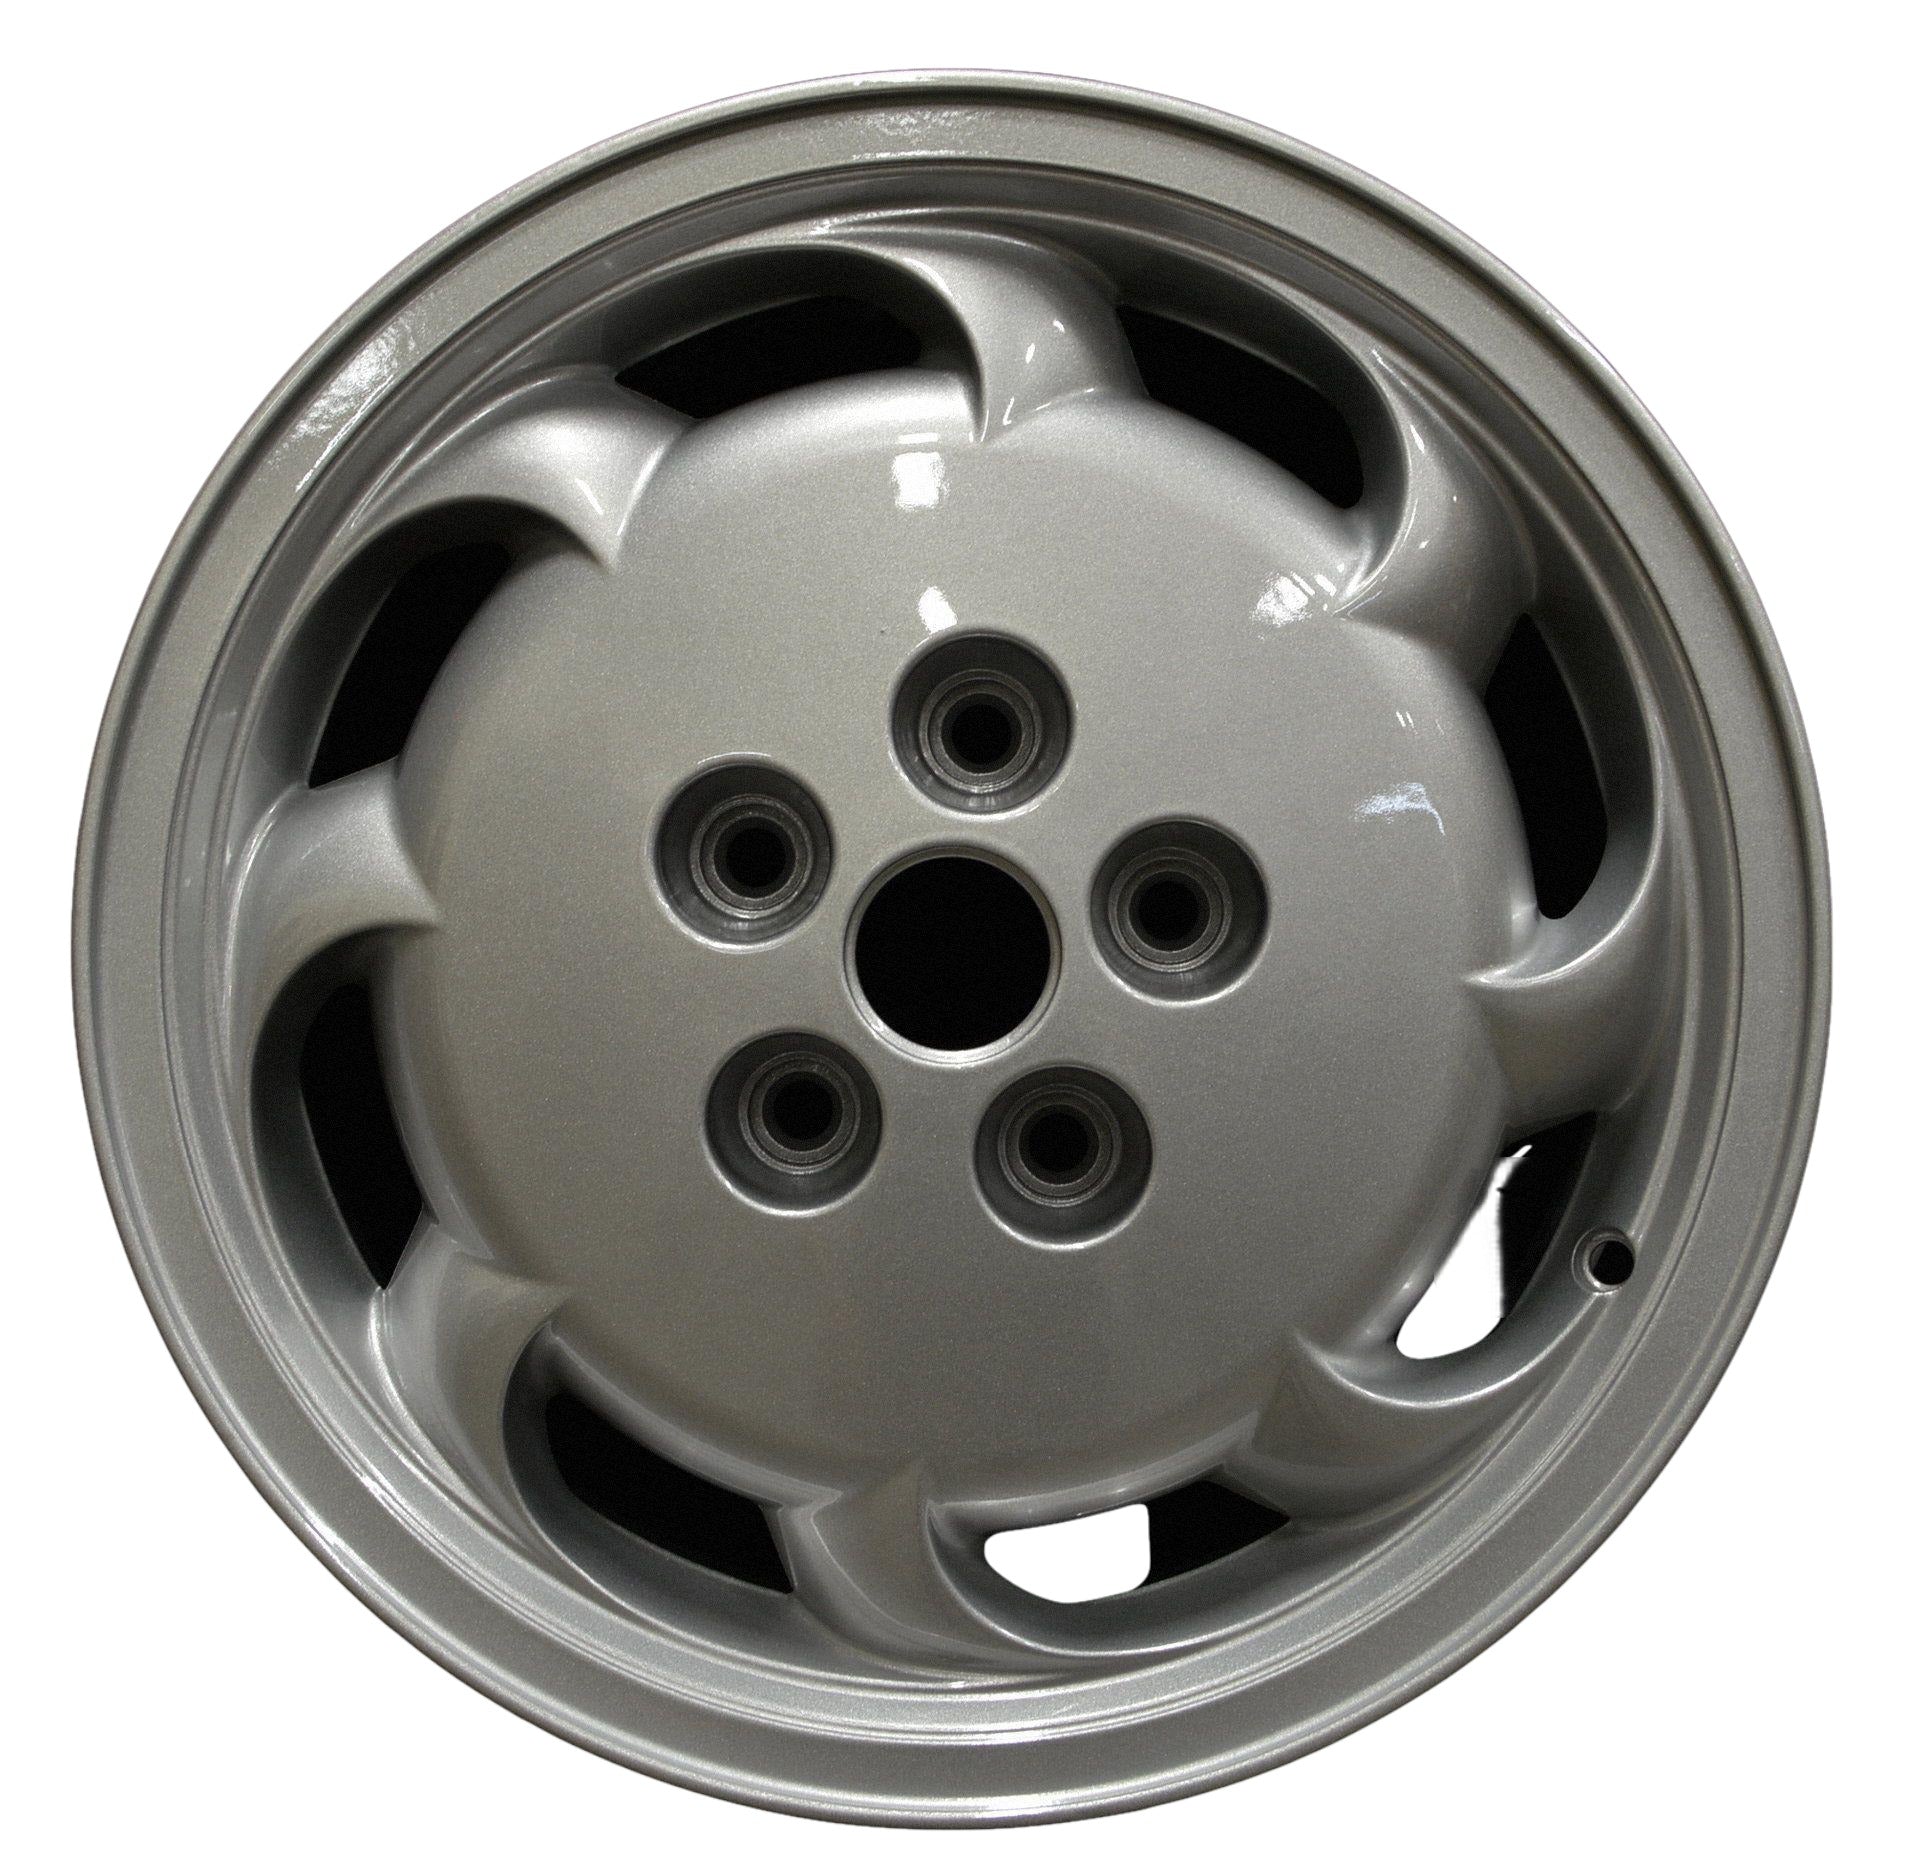 Oldsmobile 88  1992, 1993, 1994, 1995, 1996, 1997, 1998, 1999 Factory OEM Car Wheel Size 16x7 Alloy WAO.6007.PS02.FF